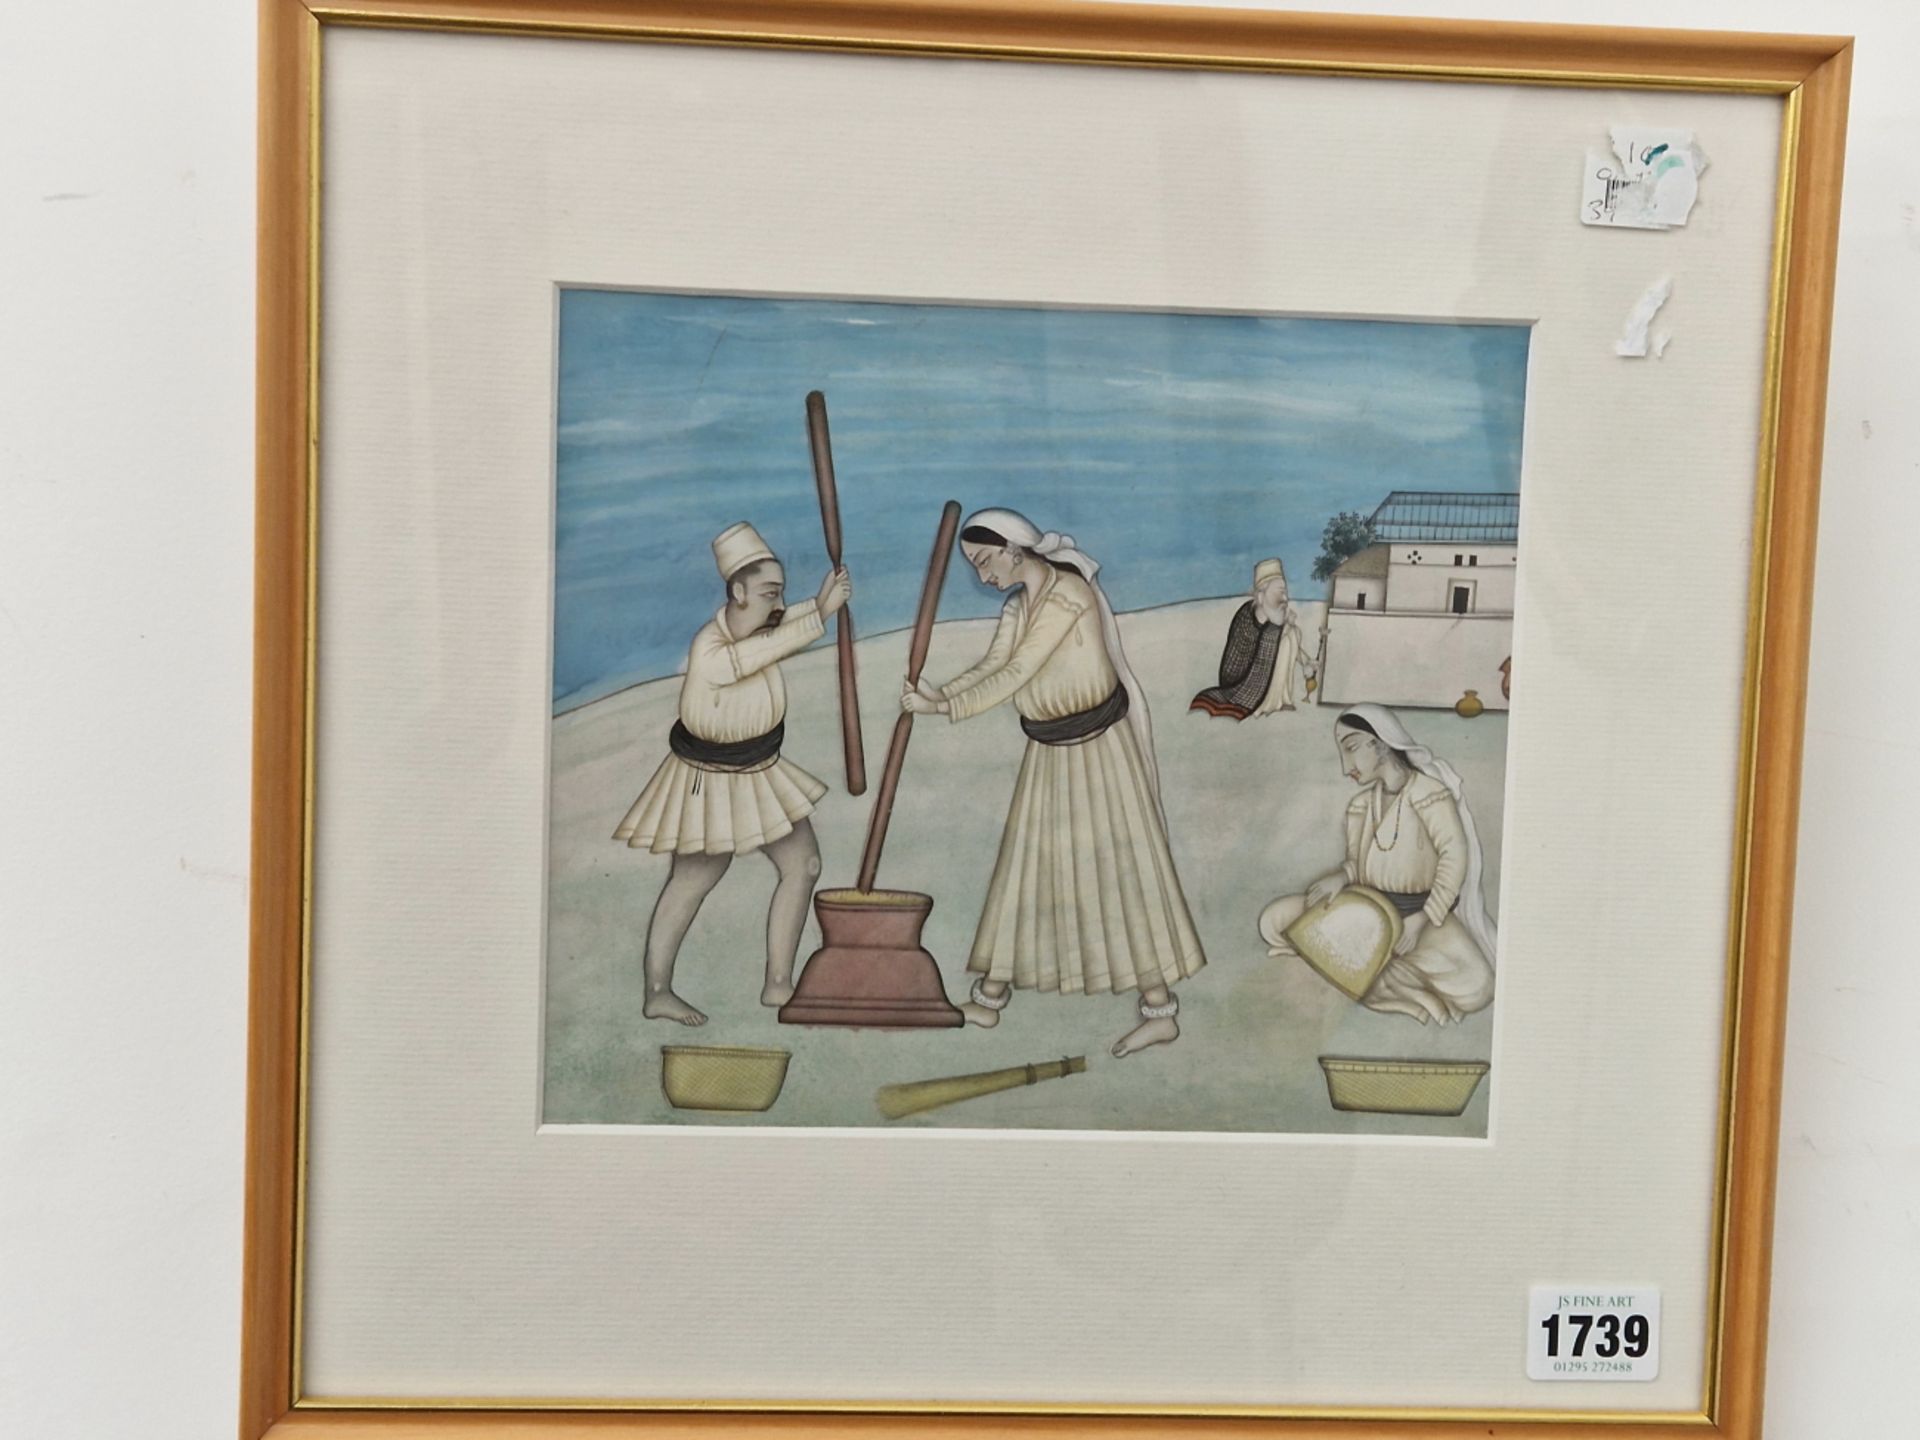 AN INDIAN WATERCOLOUR OF A HUSBAND AND WIFE POUNDING GRAIN WHILE AN ELDERLEY MAN SMOKES A HOOKAH - Image 2 of 2